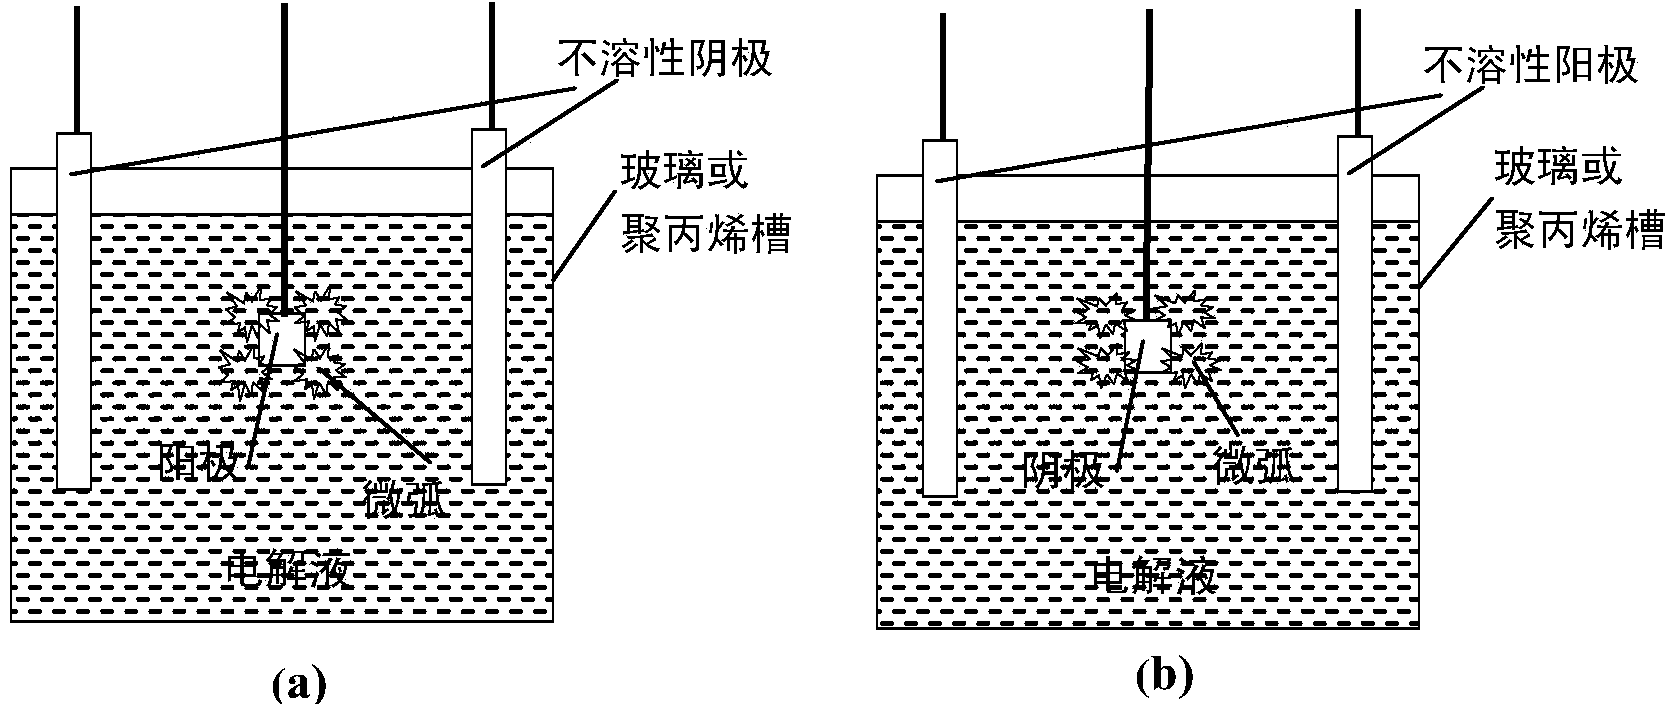 Method for large-area deposition of coating and surface modification by cathodic plasma electrolysis